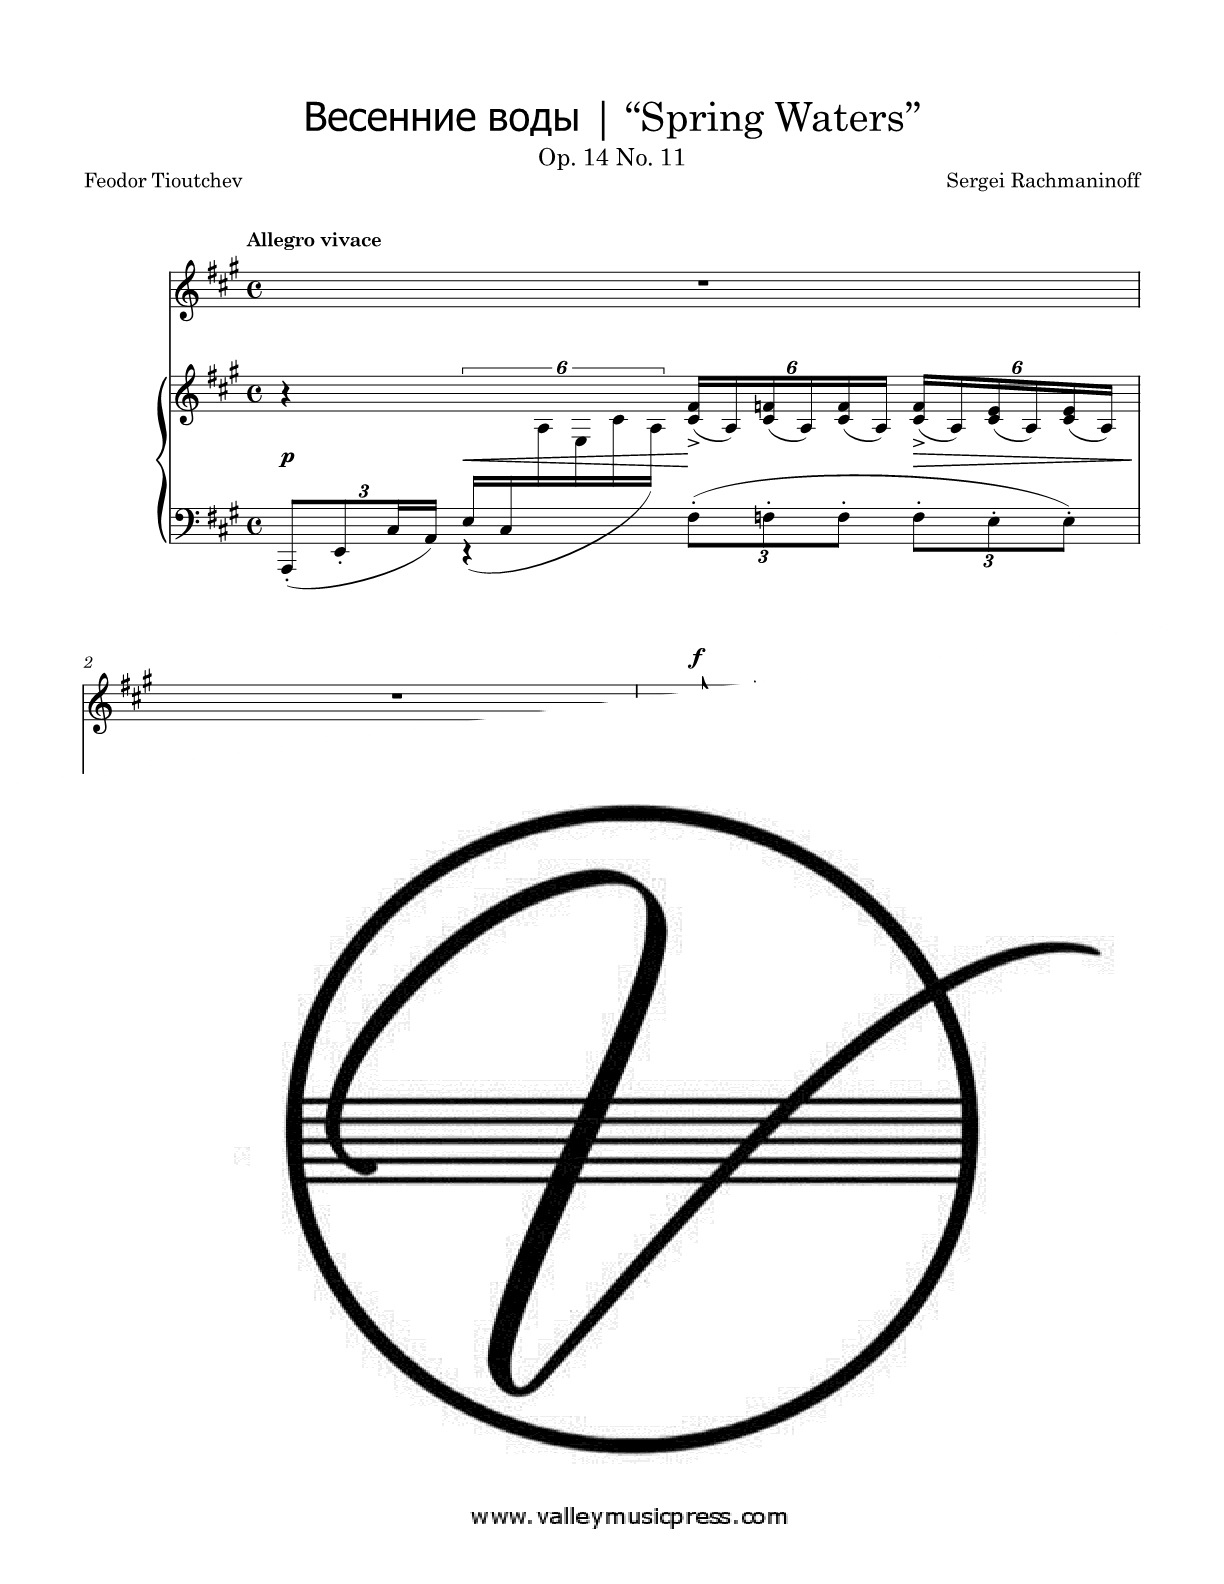 Rachmaninoff - Spring Waters Op. 14 No. 11 (Voice) - Click Image to Close